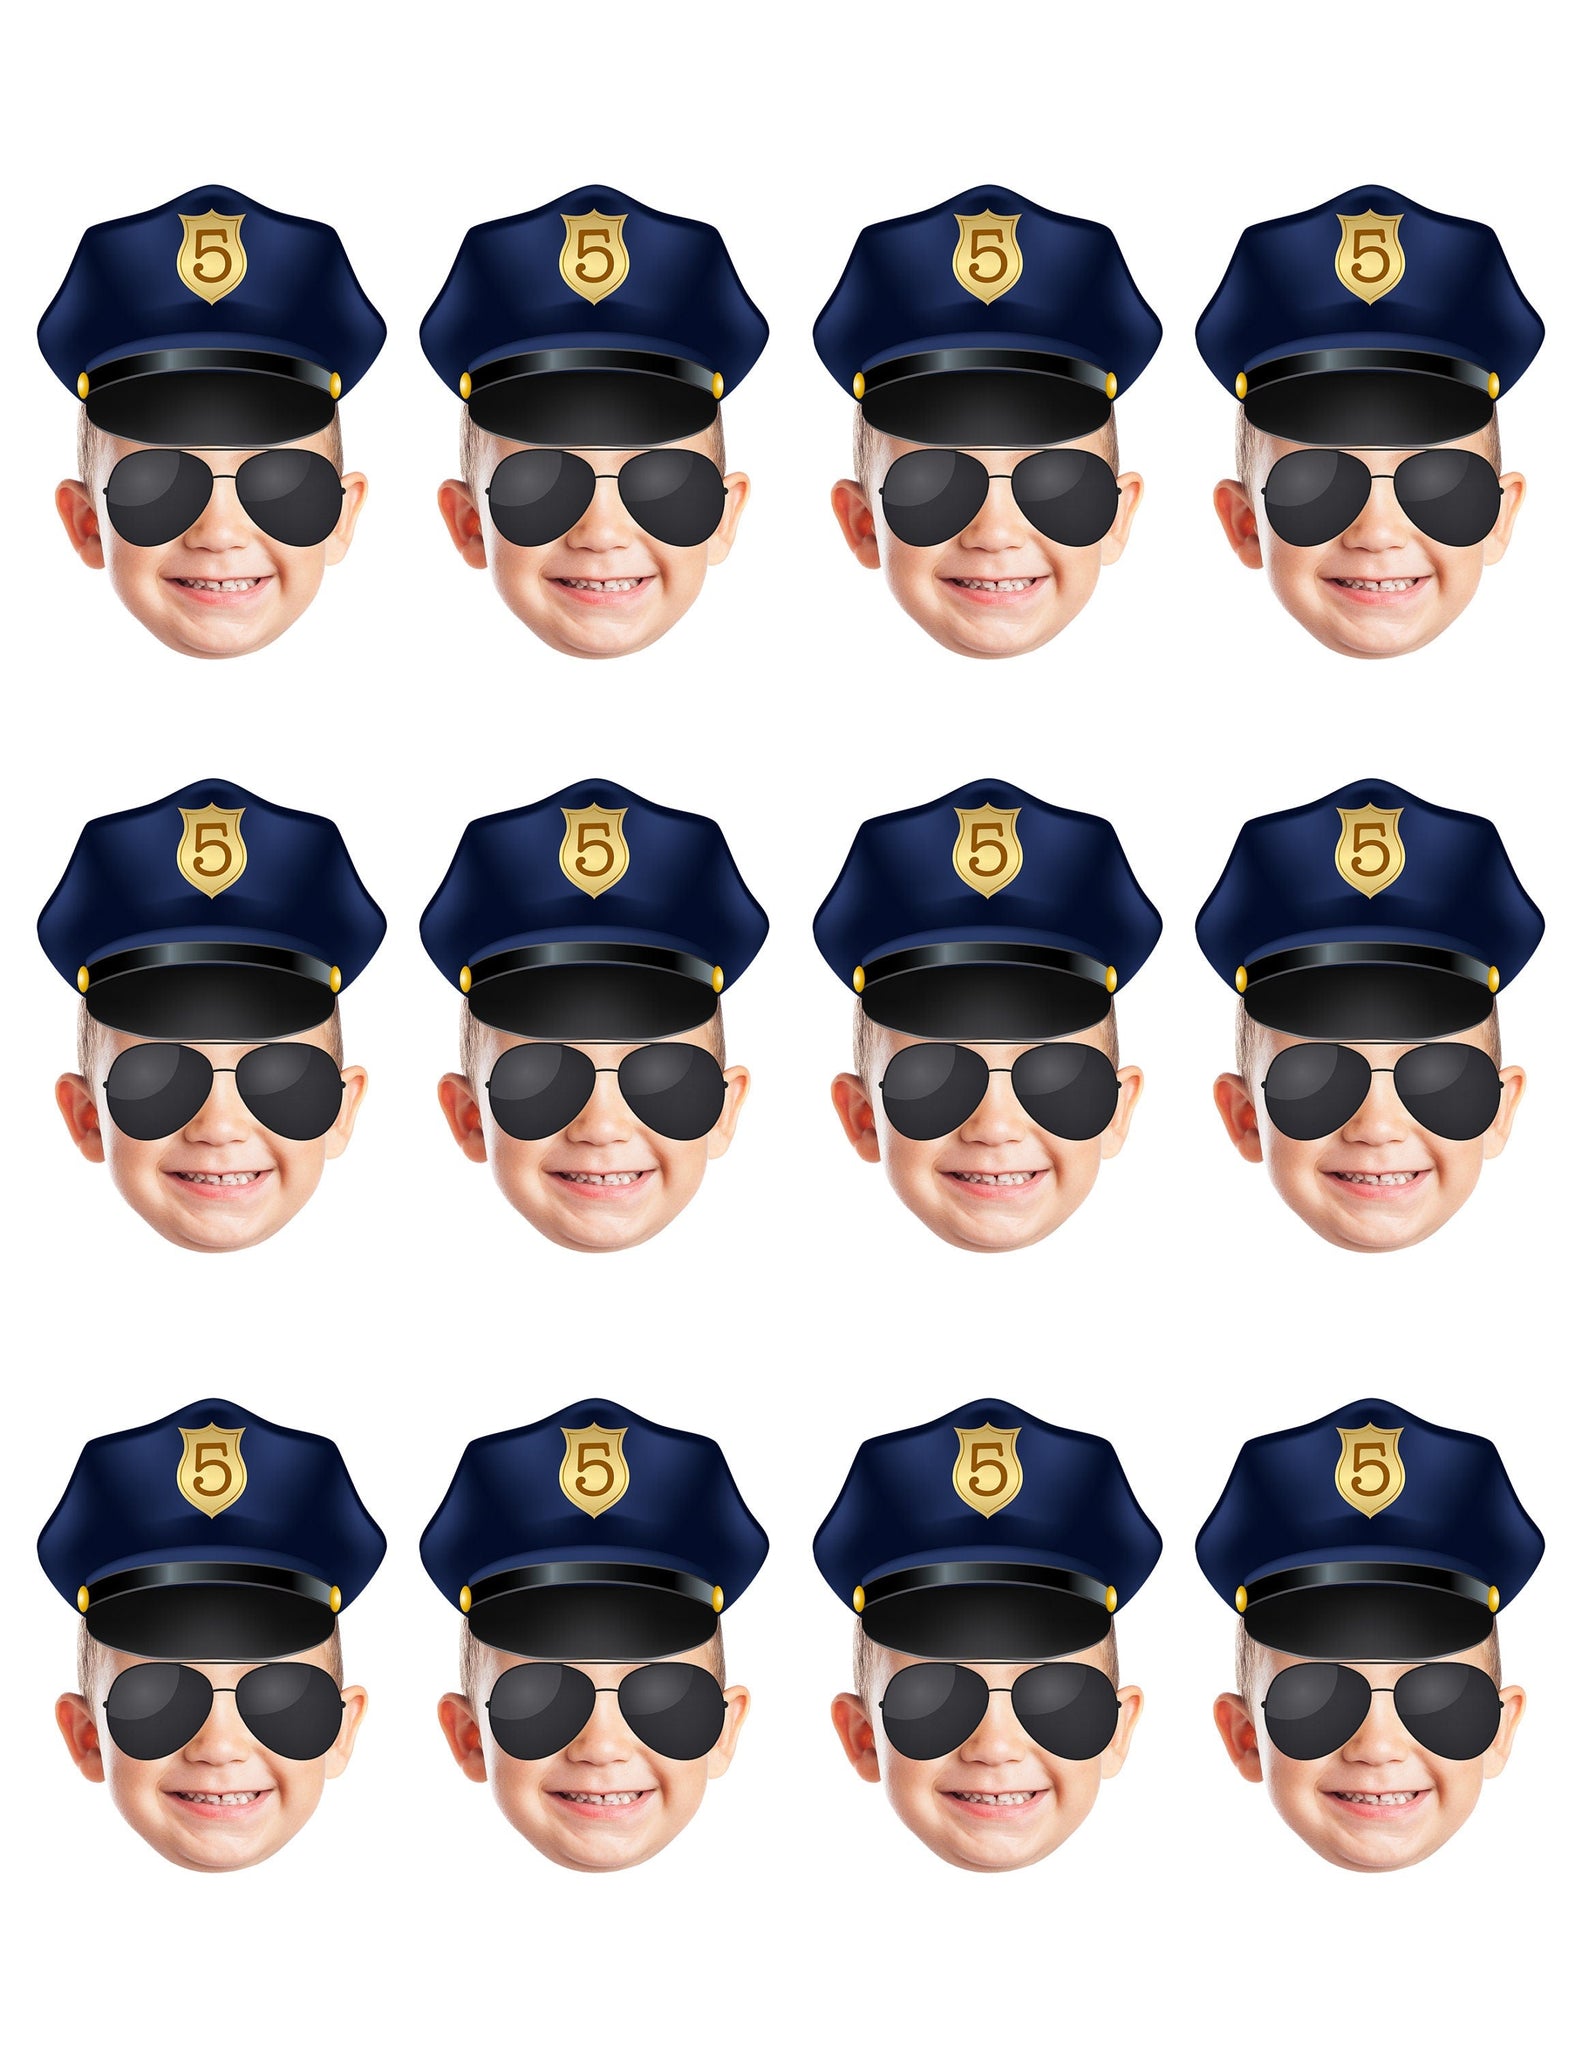 Police Cupcake Toppers, Photo Cupcake Toppers, PRINTABLE Cupcake Toppers, Cupcake Toppers with Photo, Police Birthday Theme, Police Hat